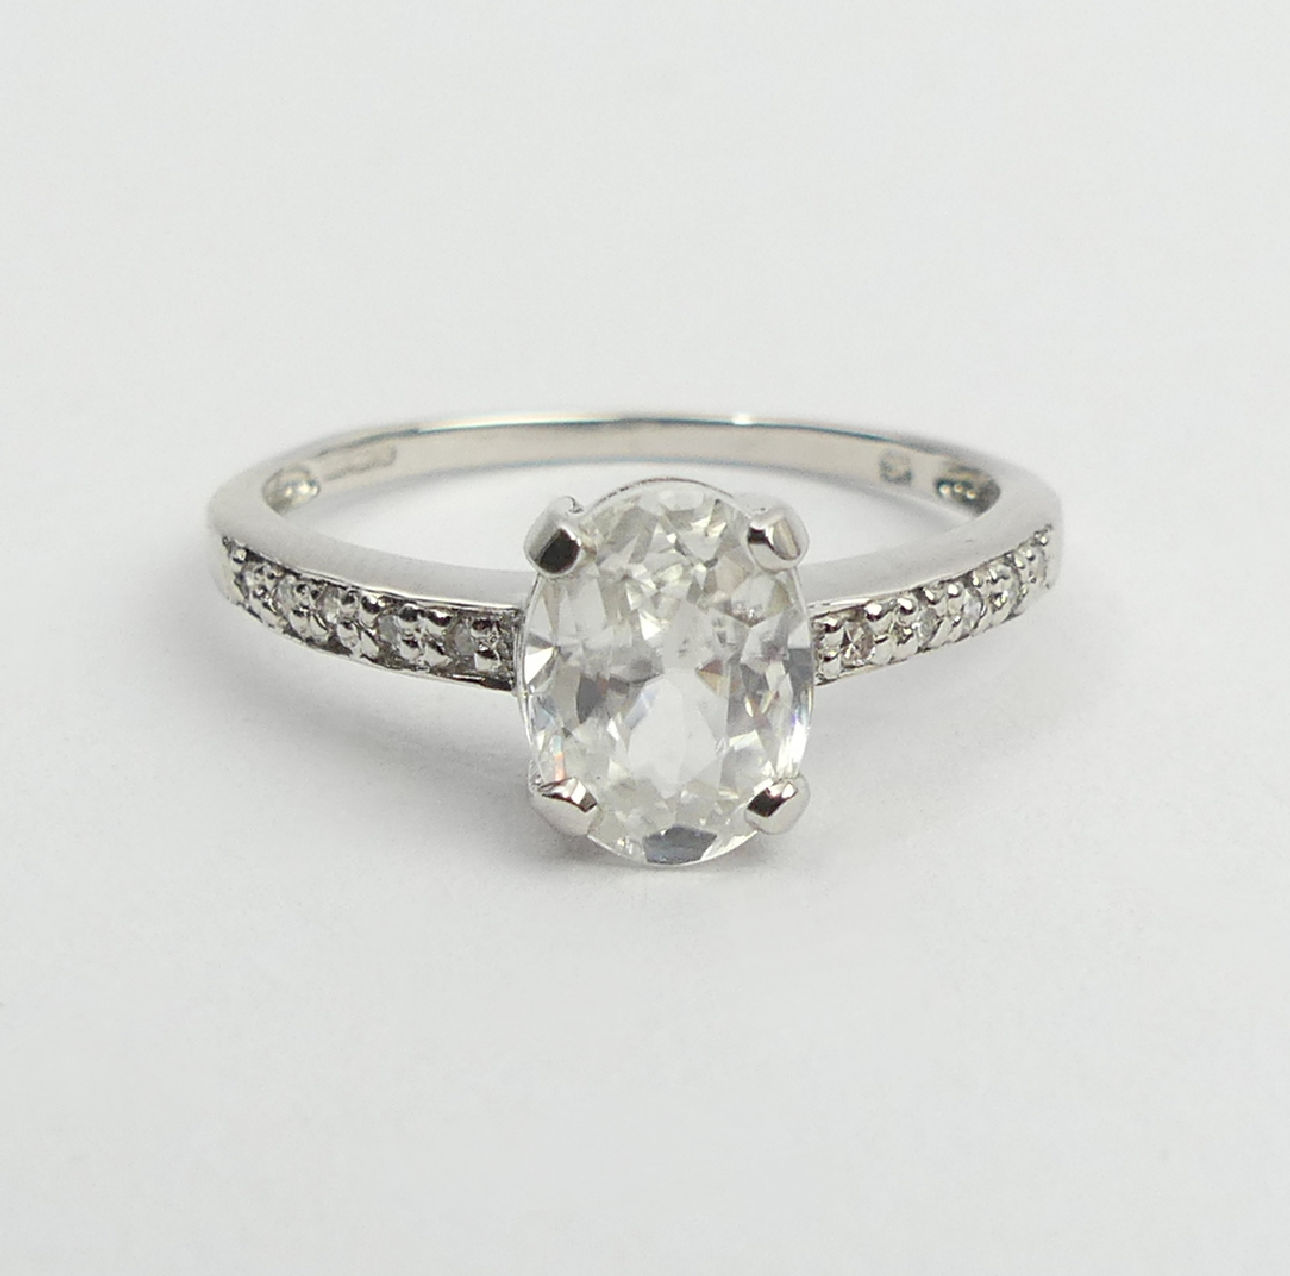 9ct white gold topaz and diamond ring, 1.9 grams, 8mm, size N1/2. UK Postage £12. - Image 2 of 6